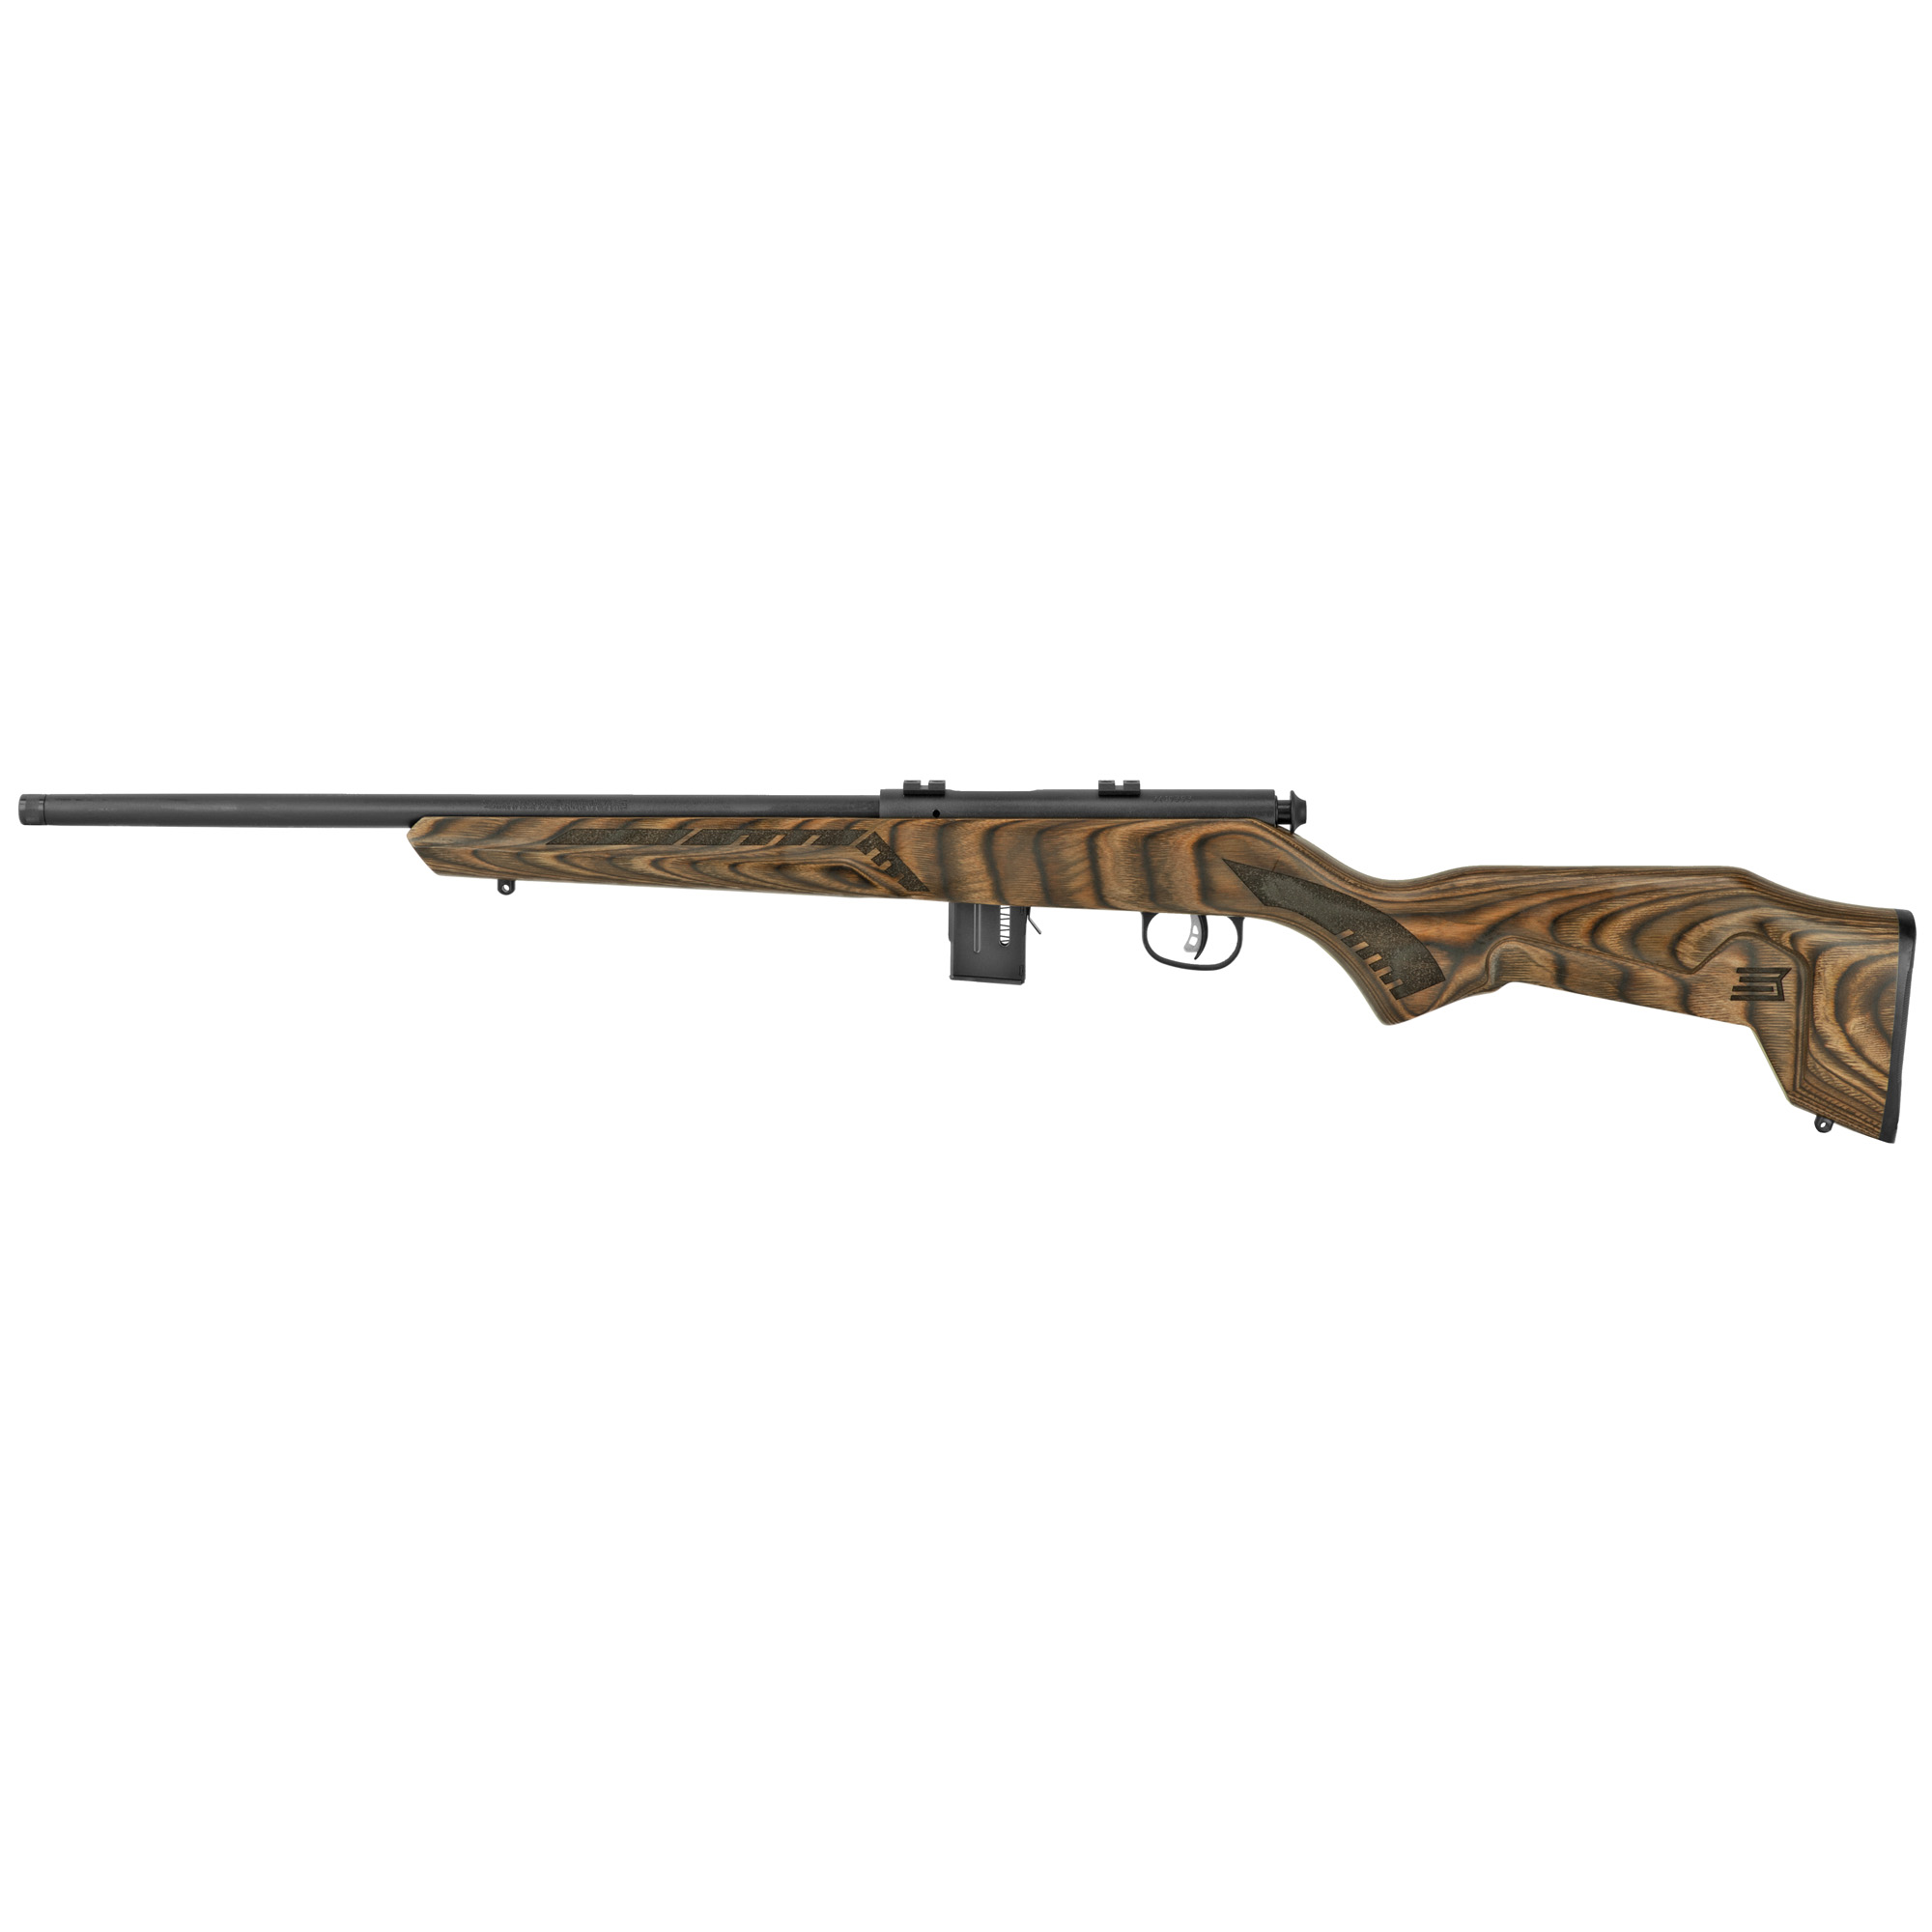 Savage, 93R17 Minimalist, Bolt Action, Rifle, 17 HMR, 18" Sporter Barrel, Brown Laminate , Laminate Stock, Right Hand, 10Rd, Includes 2 piece Weaver Base And 1 10rd Magazine